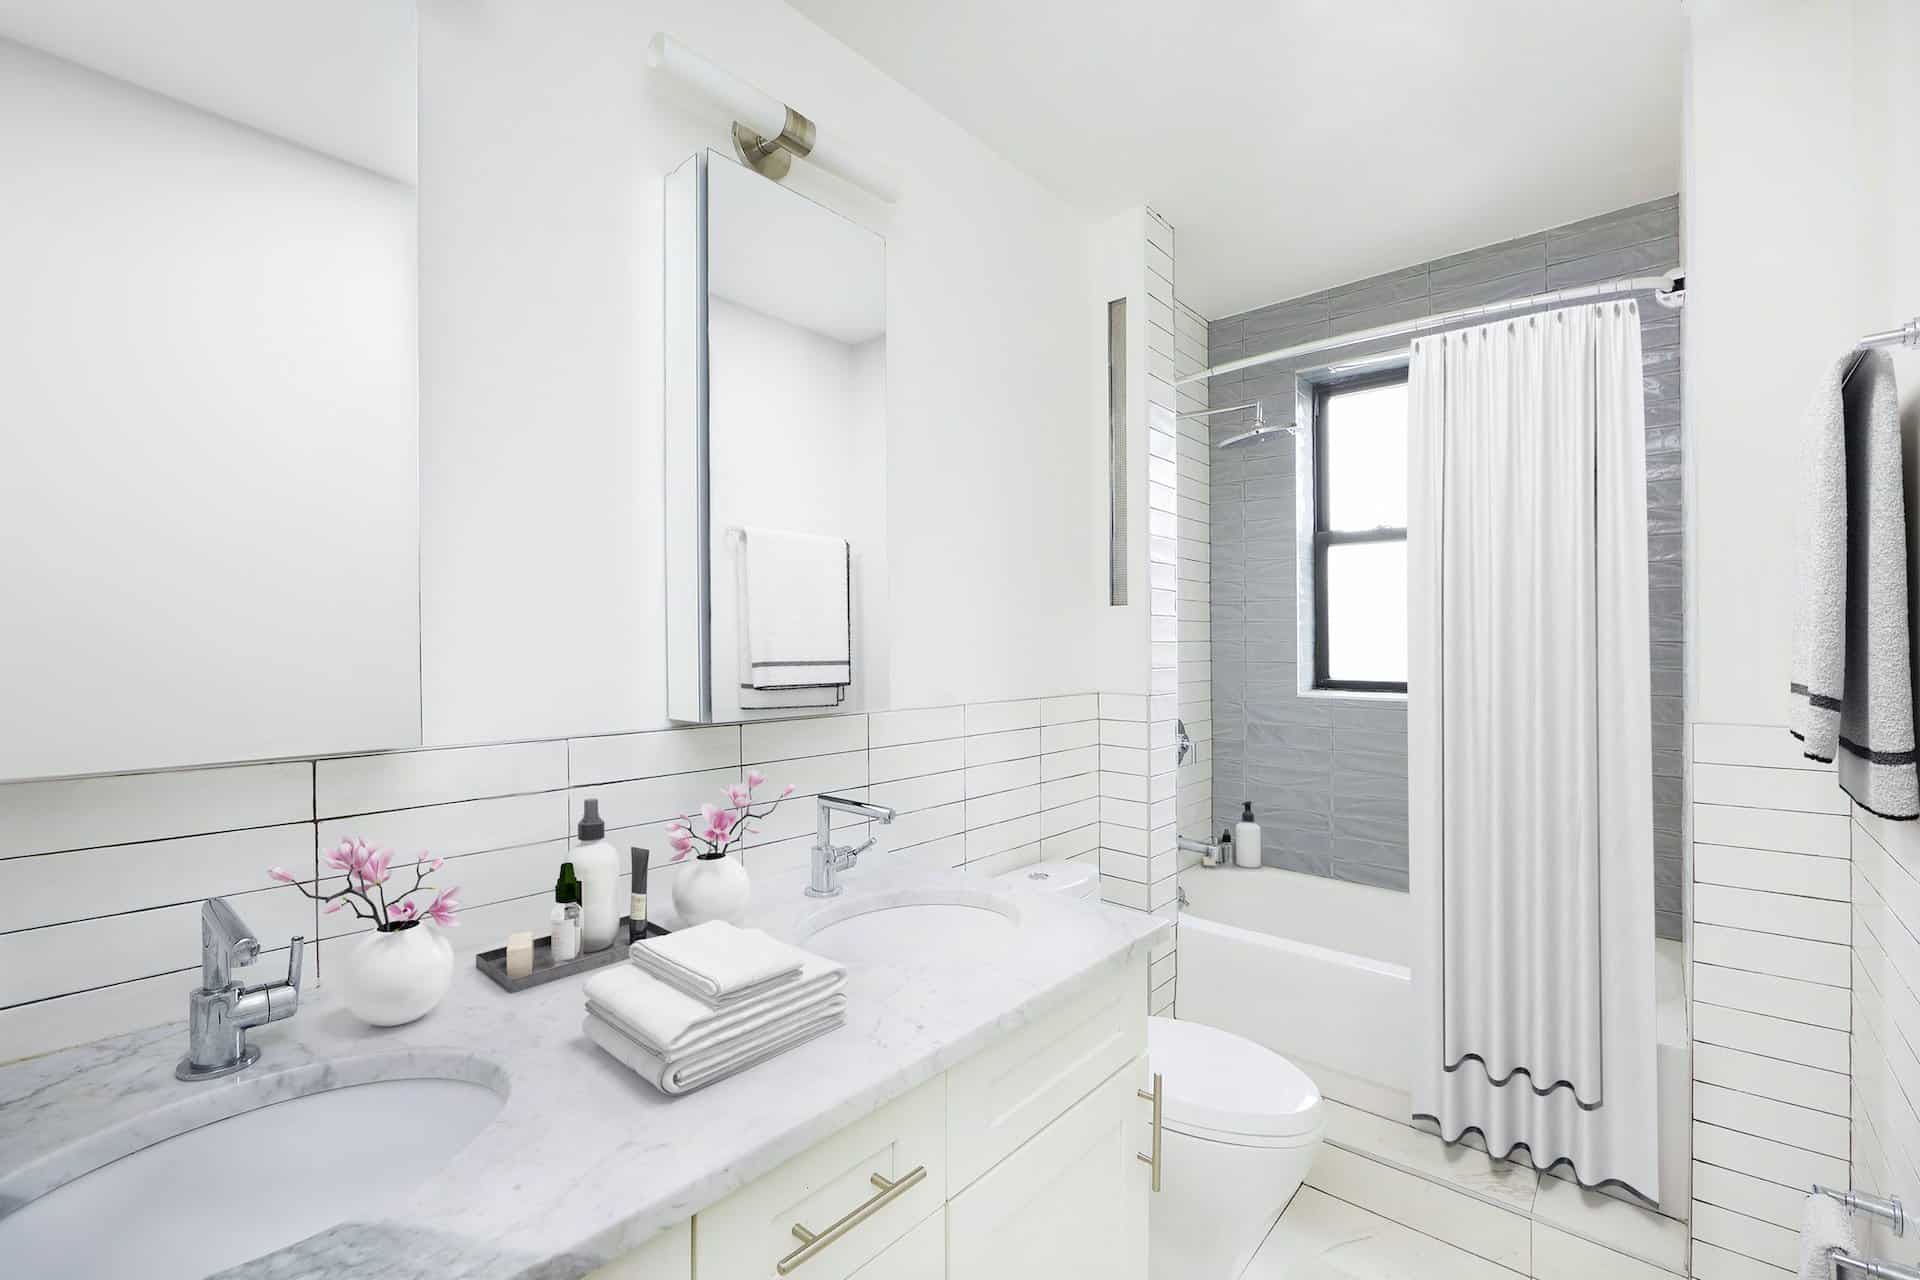 Bathroom at 457 15th Street apartments with a double vanity, mirrors, subway tile on the walls and a soaking tub with shower.